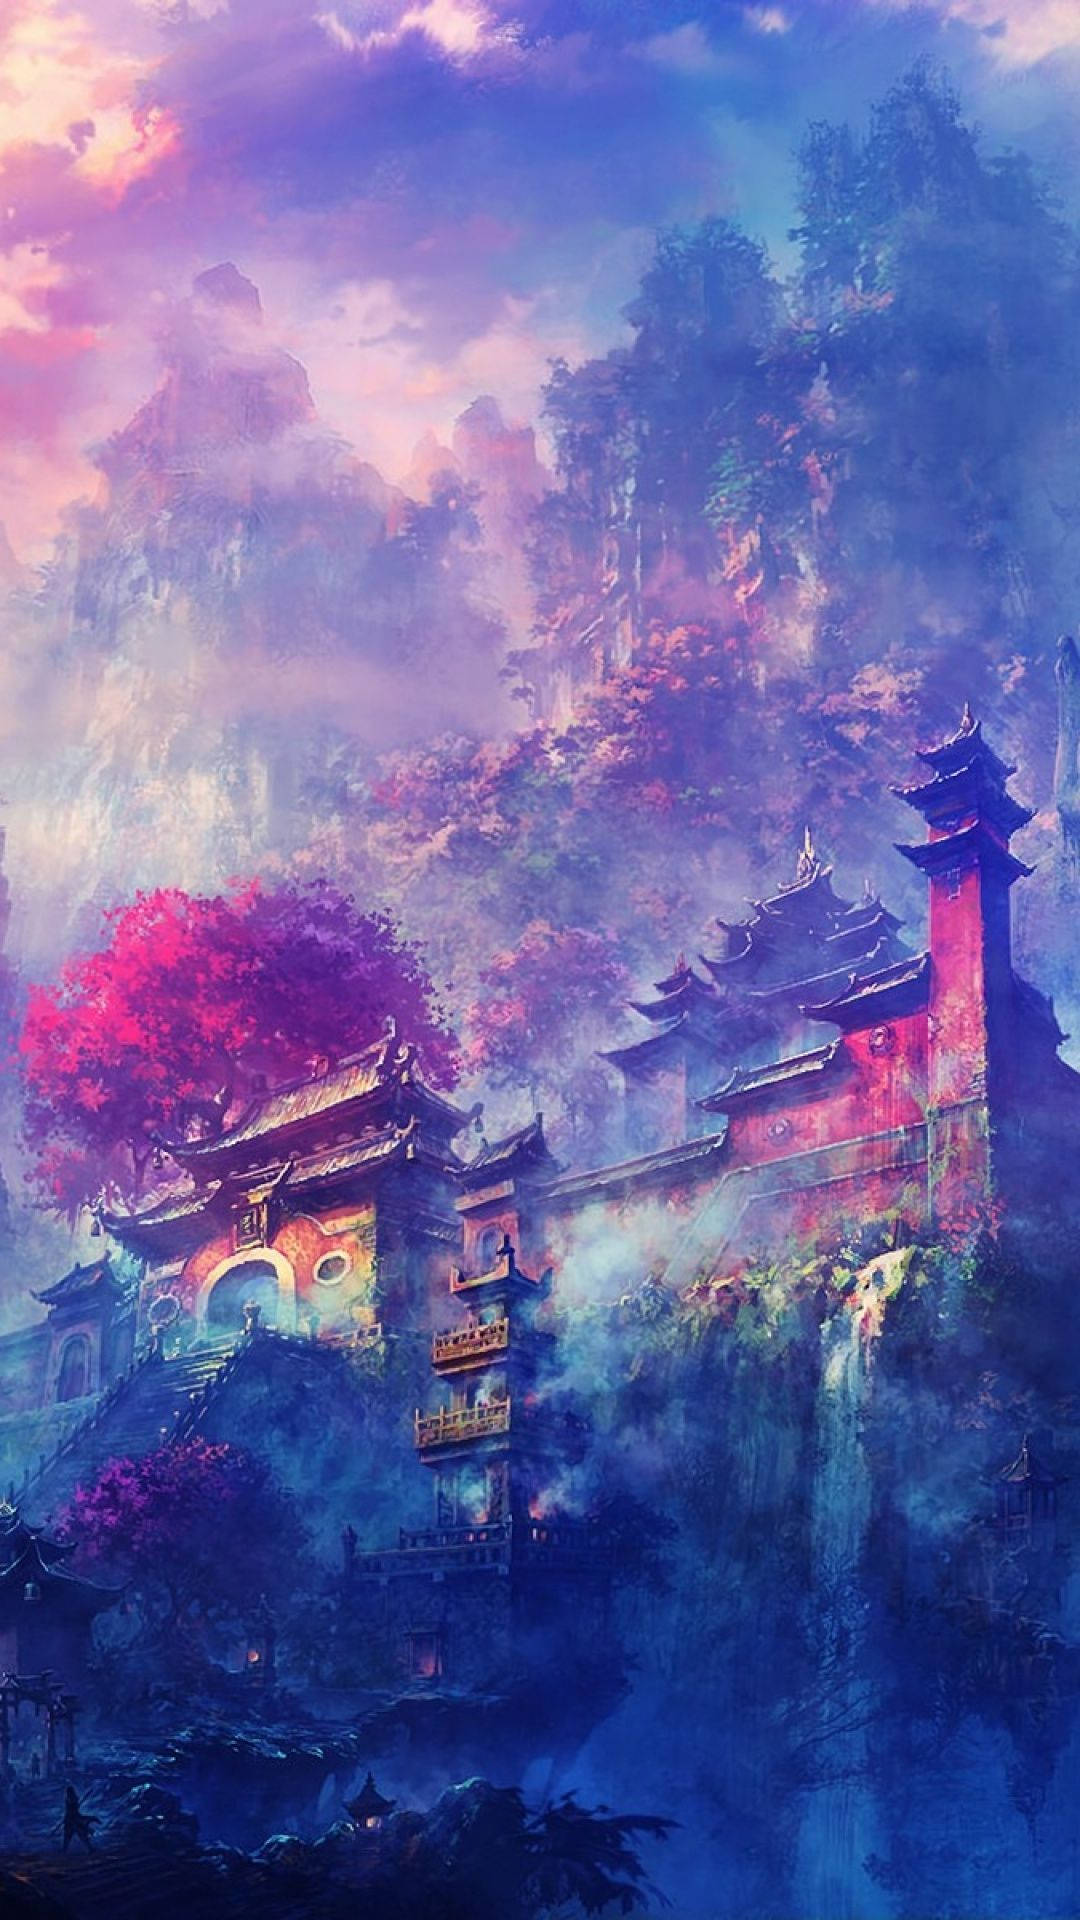 Mystical tall Japanese buildings erected in the mountains surrounded by fog and with waterfall. Art using vibrant and dull colors. 